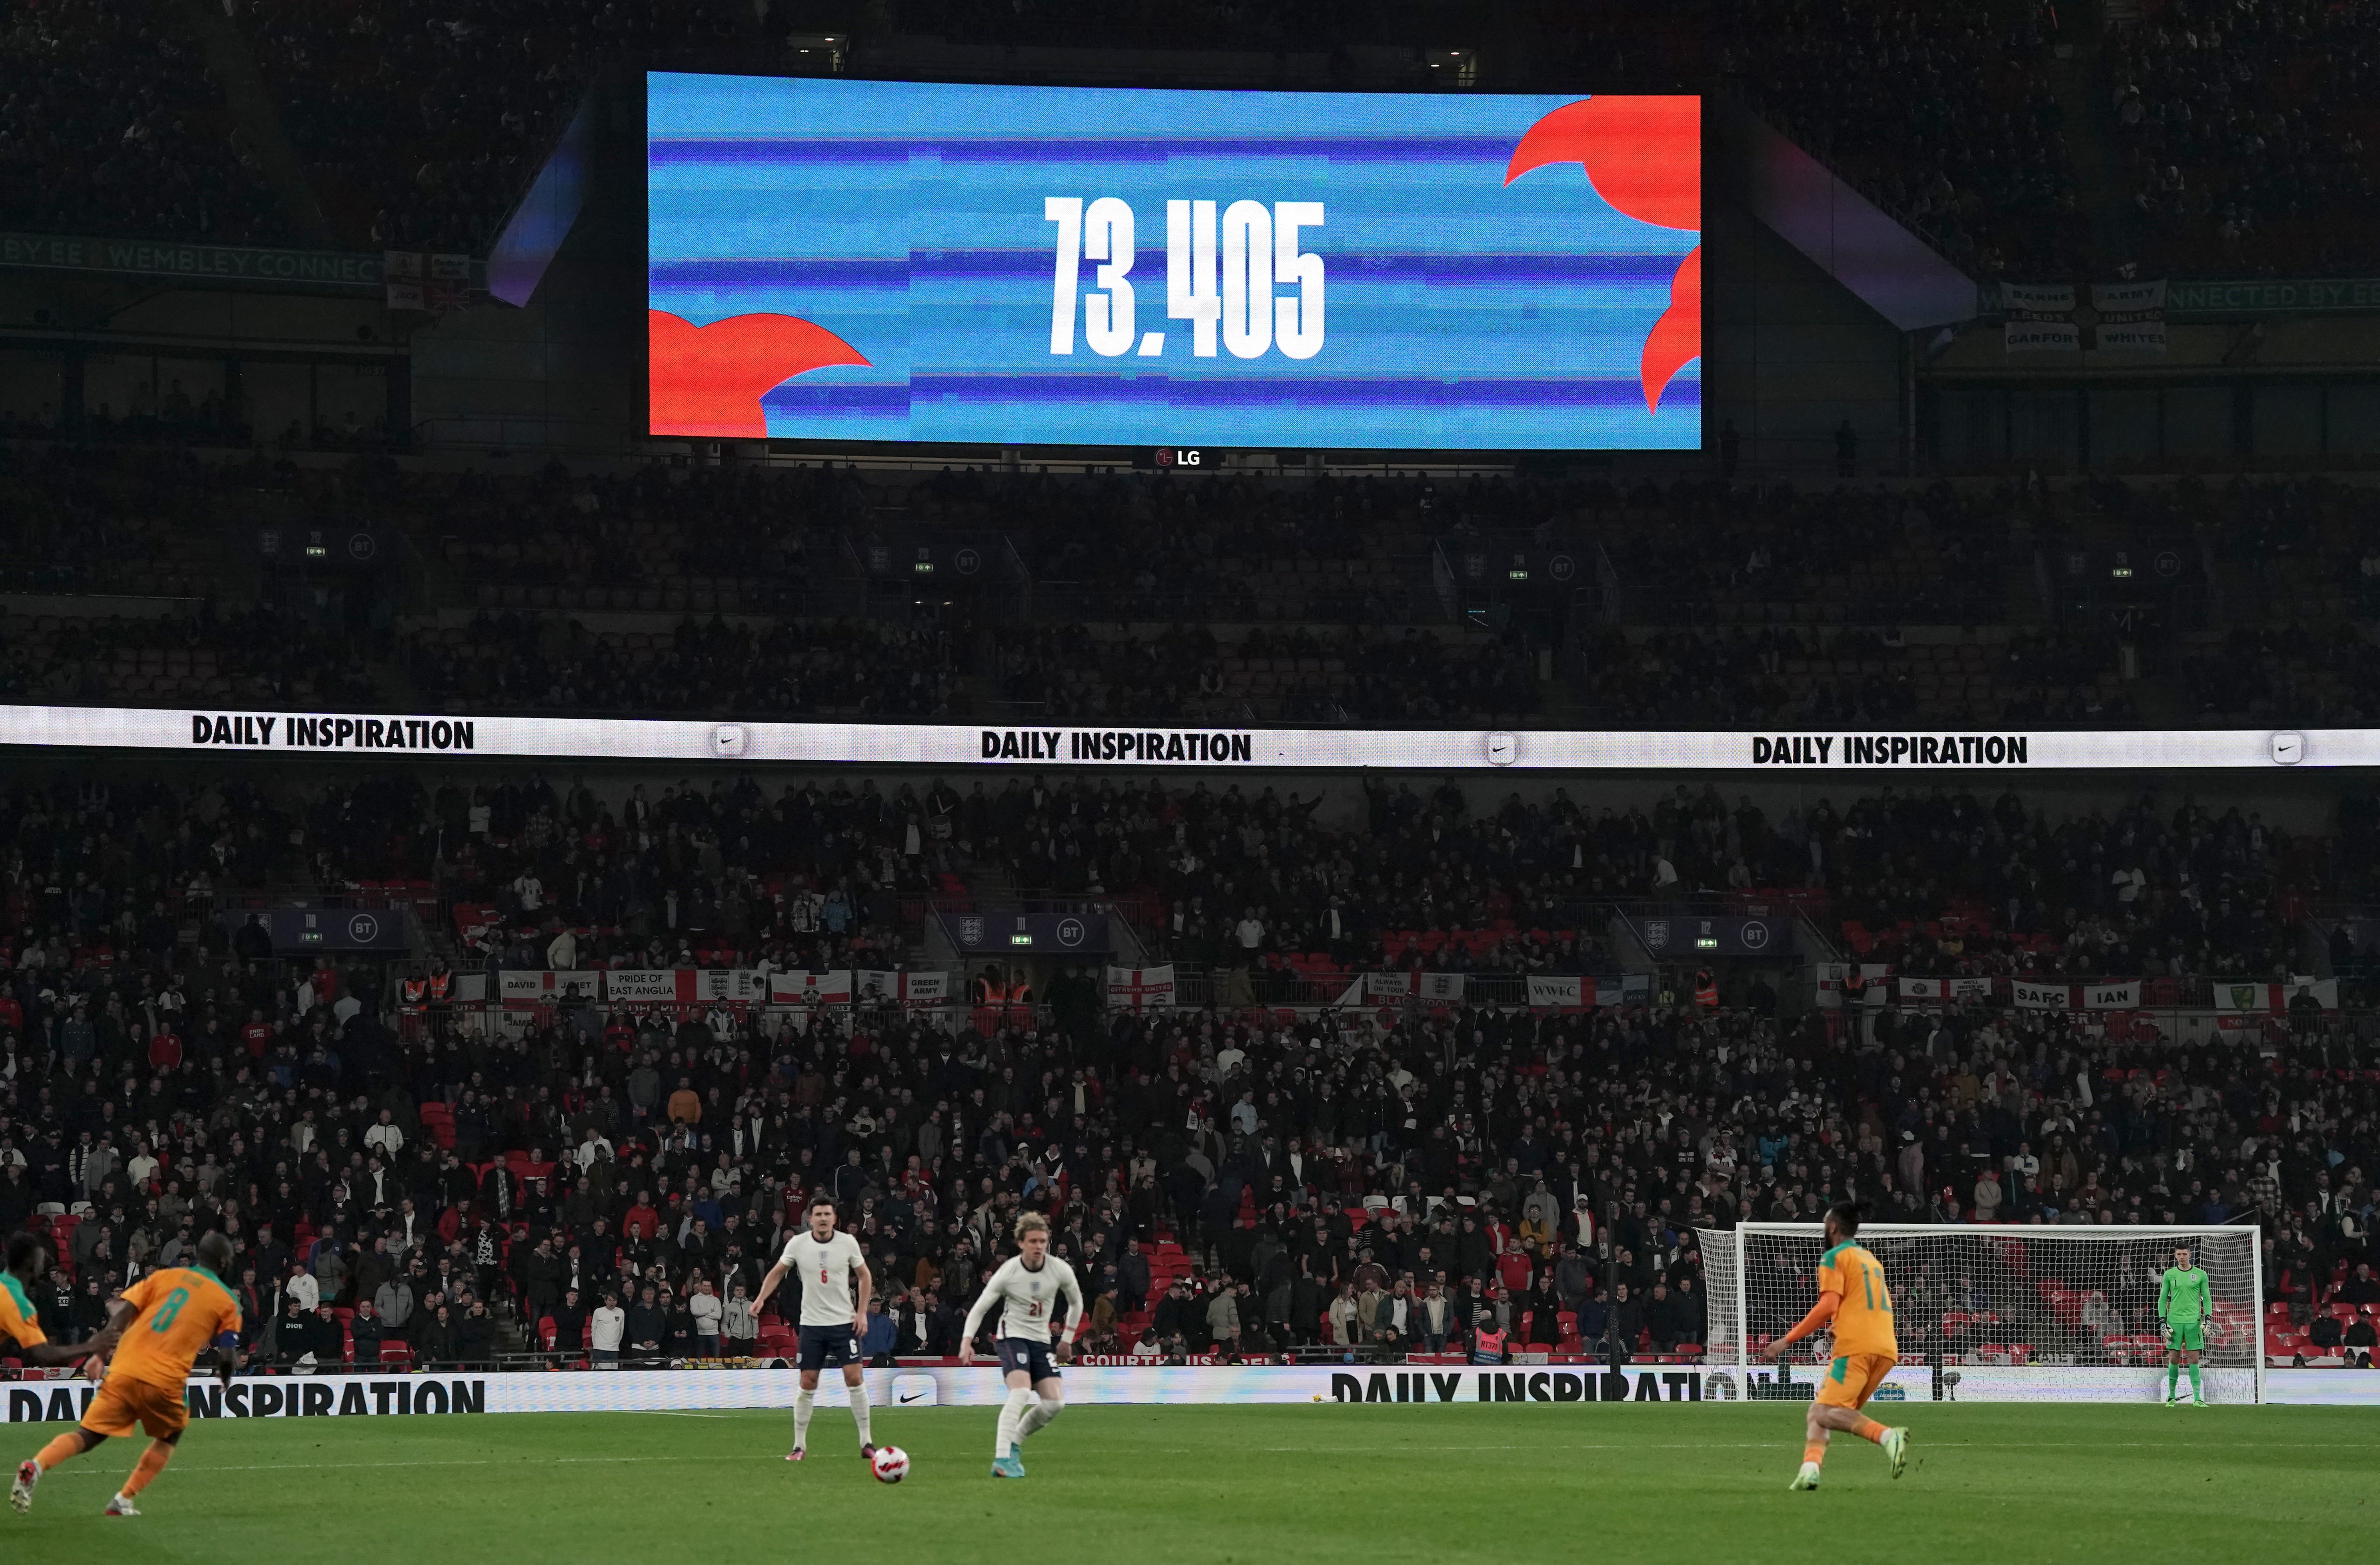 There were long waits for football fans following an international friendly match at Wembley Stadium, London, on Tuesday night (Nick Potts/PA)